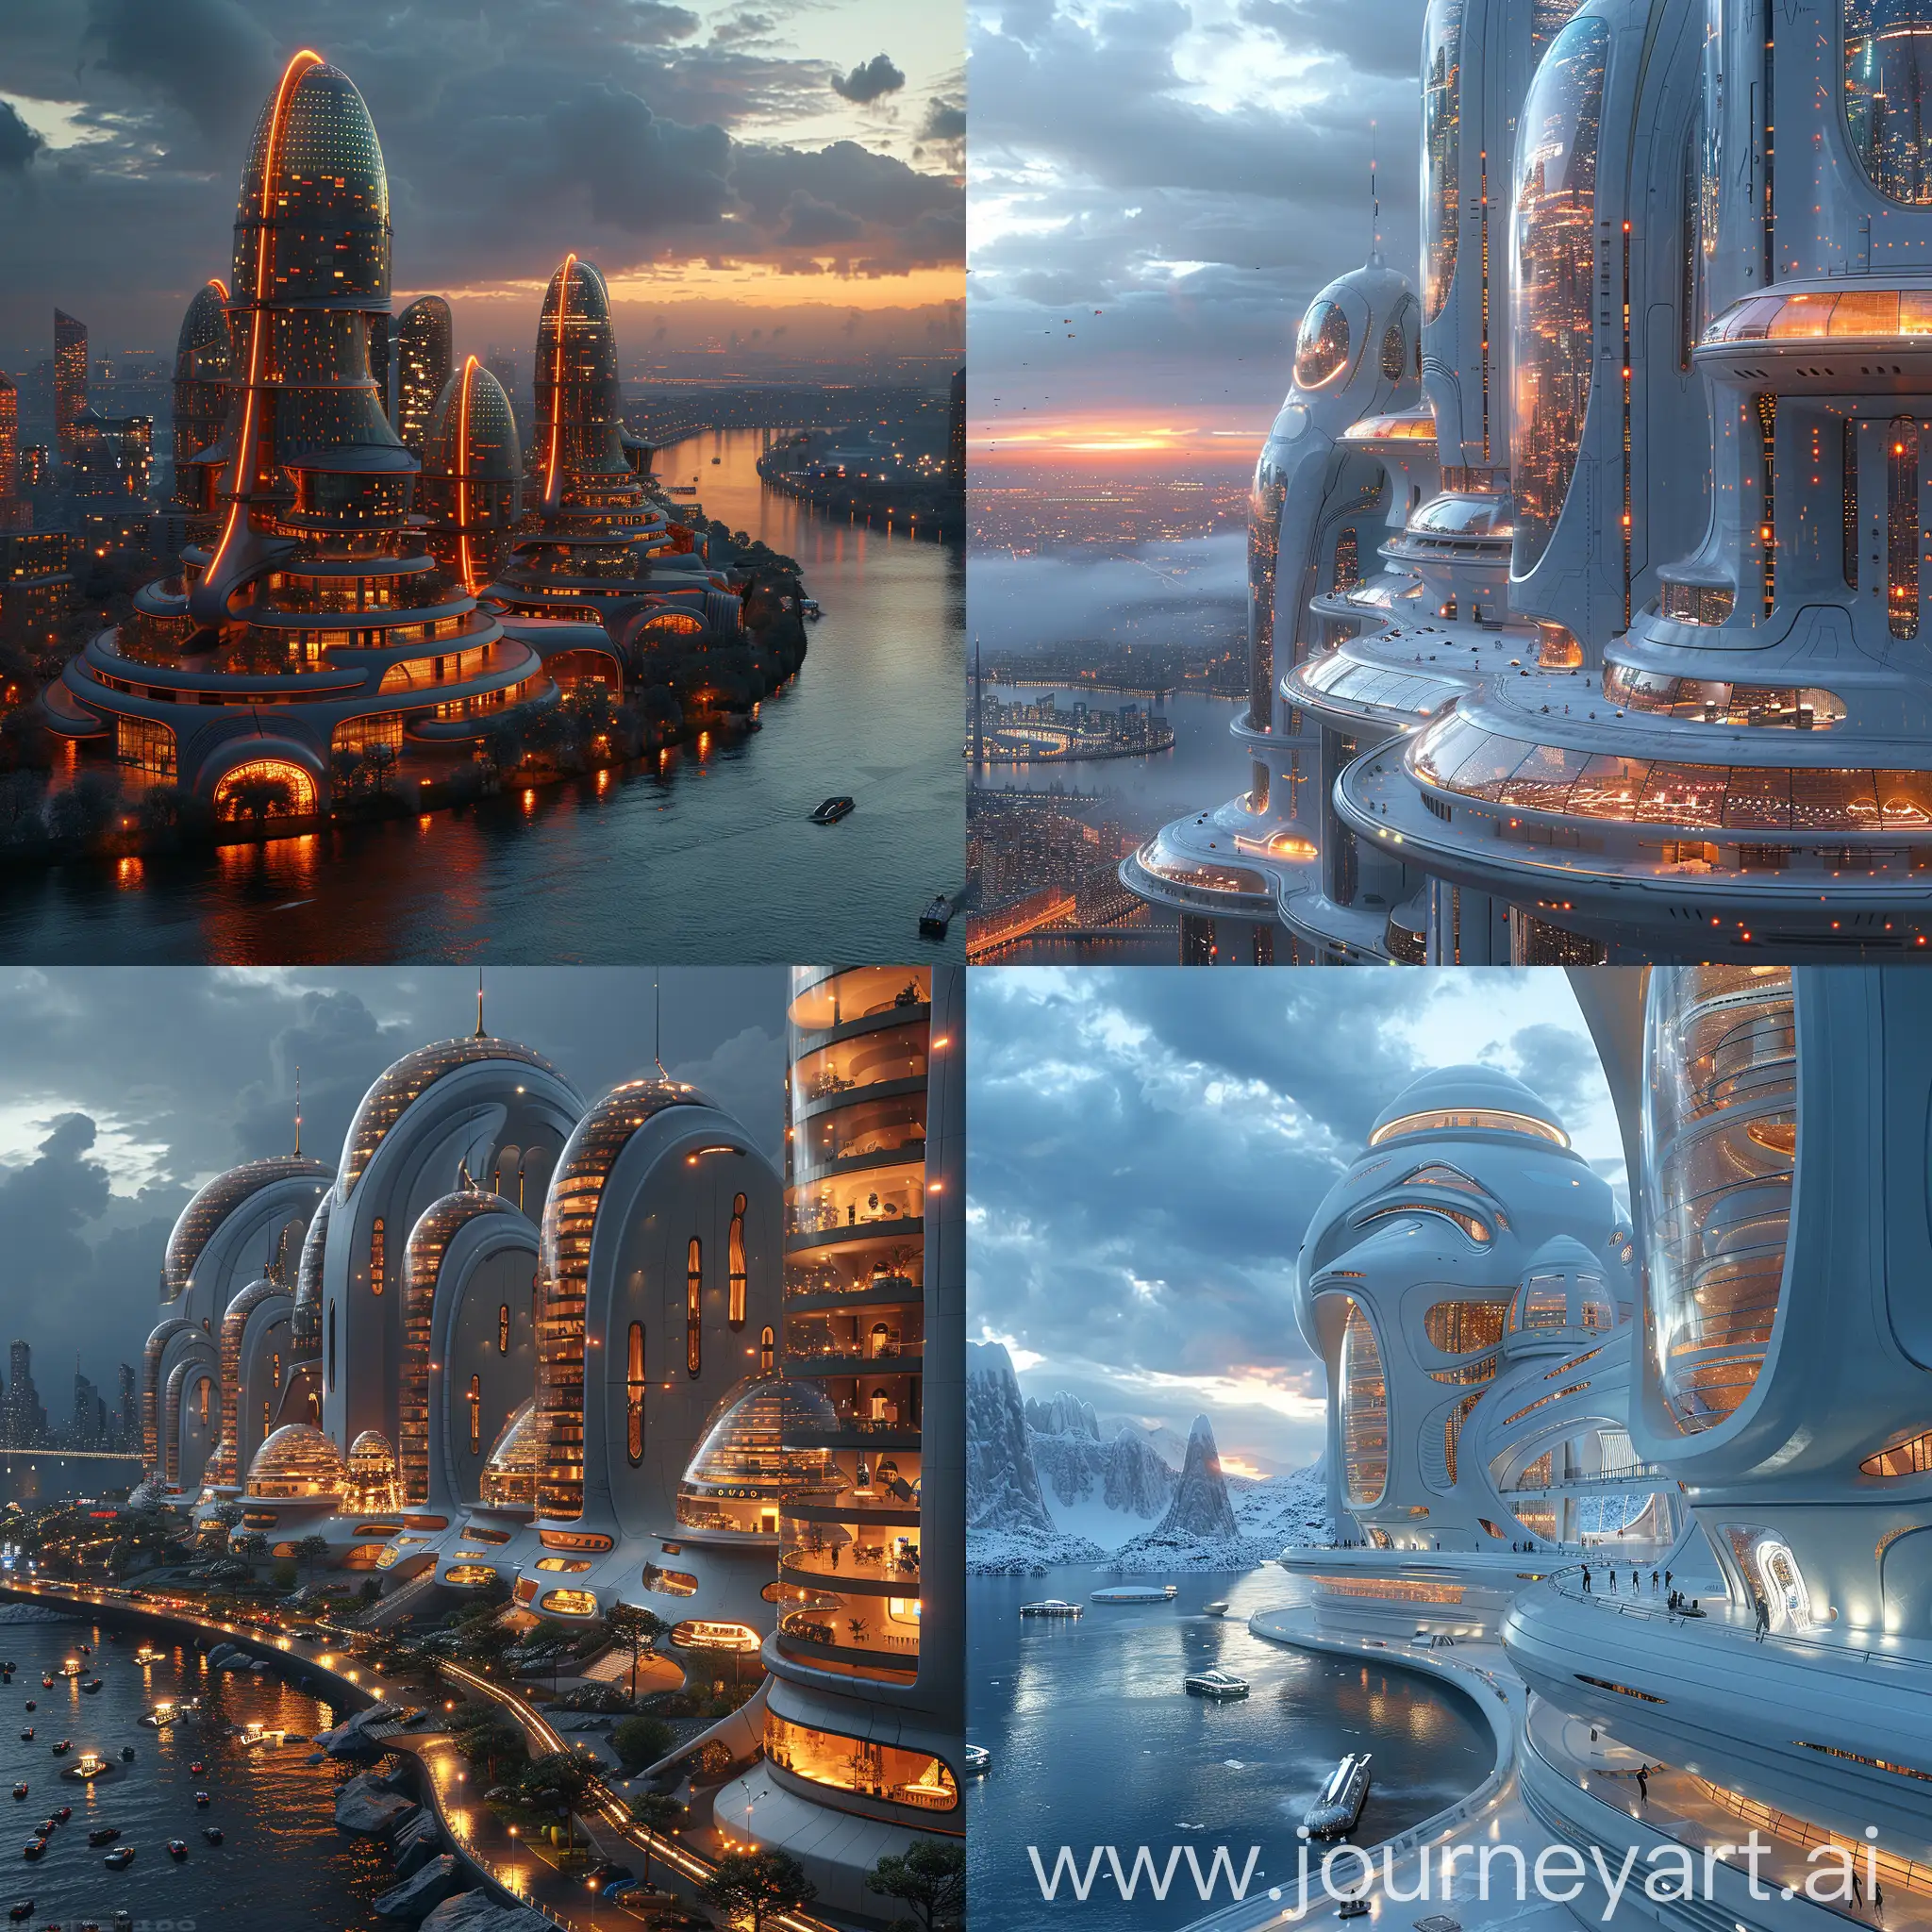 Futuristic-Moscow-Cityscape-in-UltraModern-Blade-Runner-Style